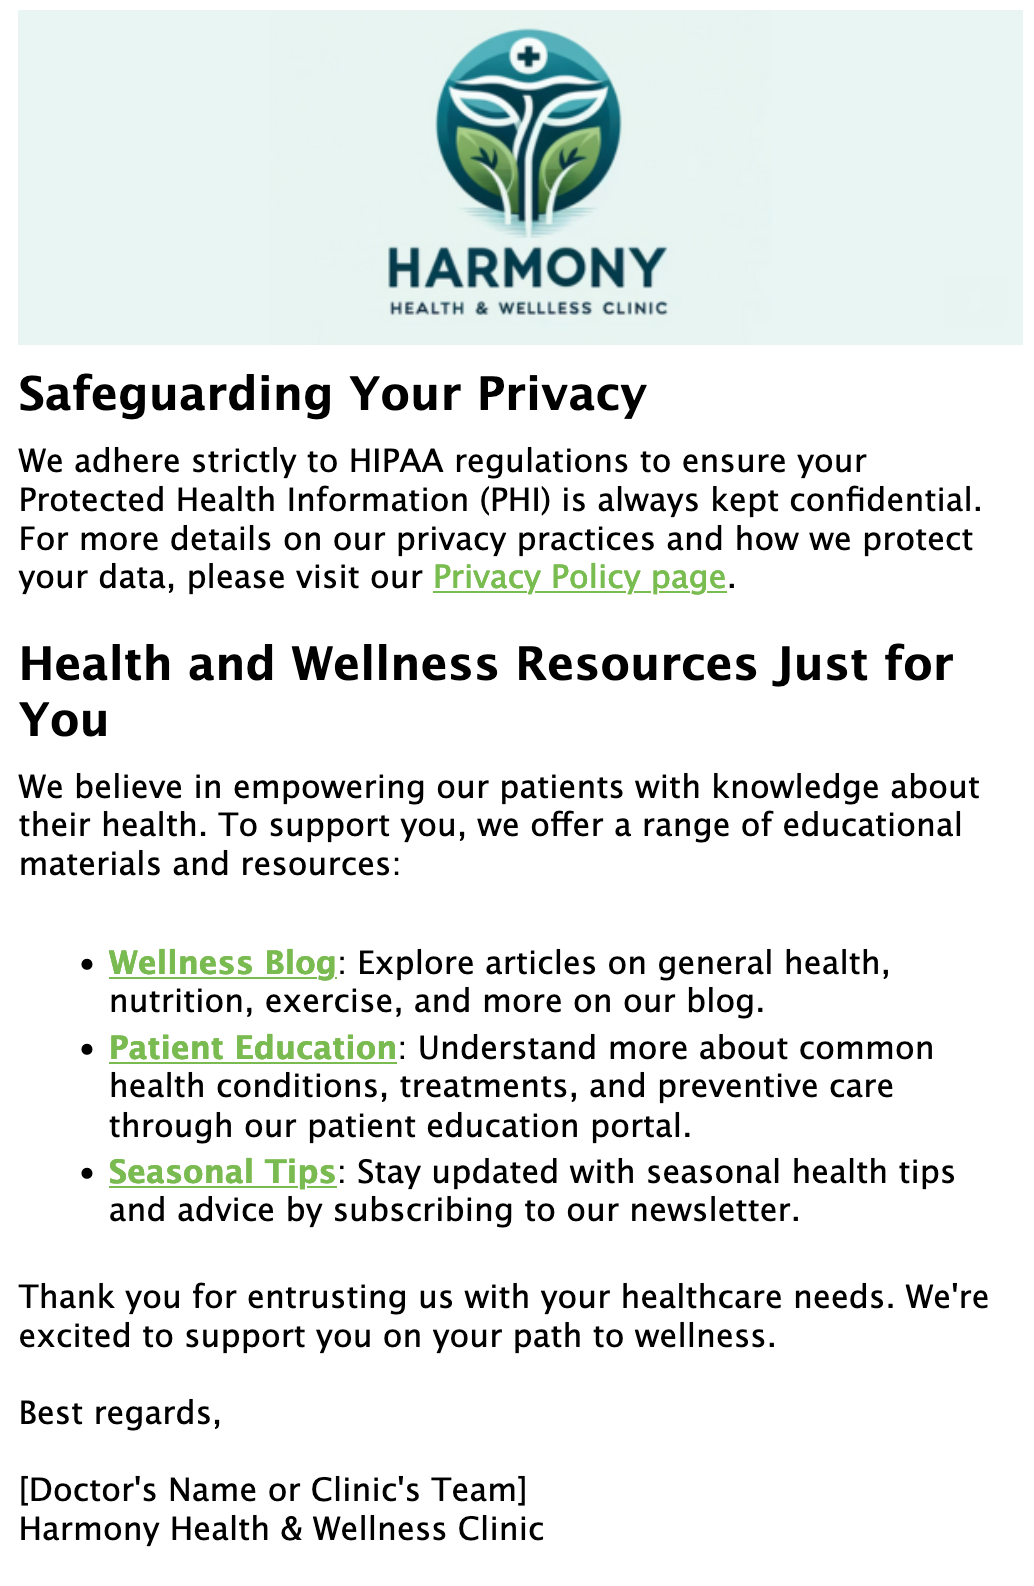 Your privacy and wellness resources at Harmony Health & Wellness